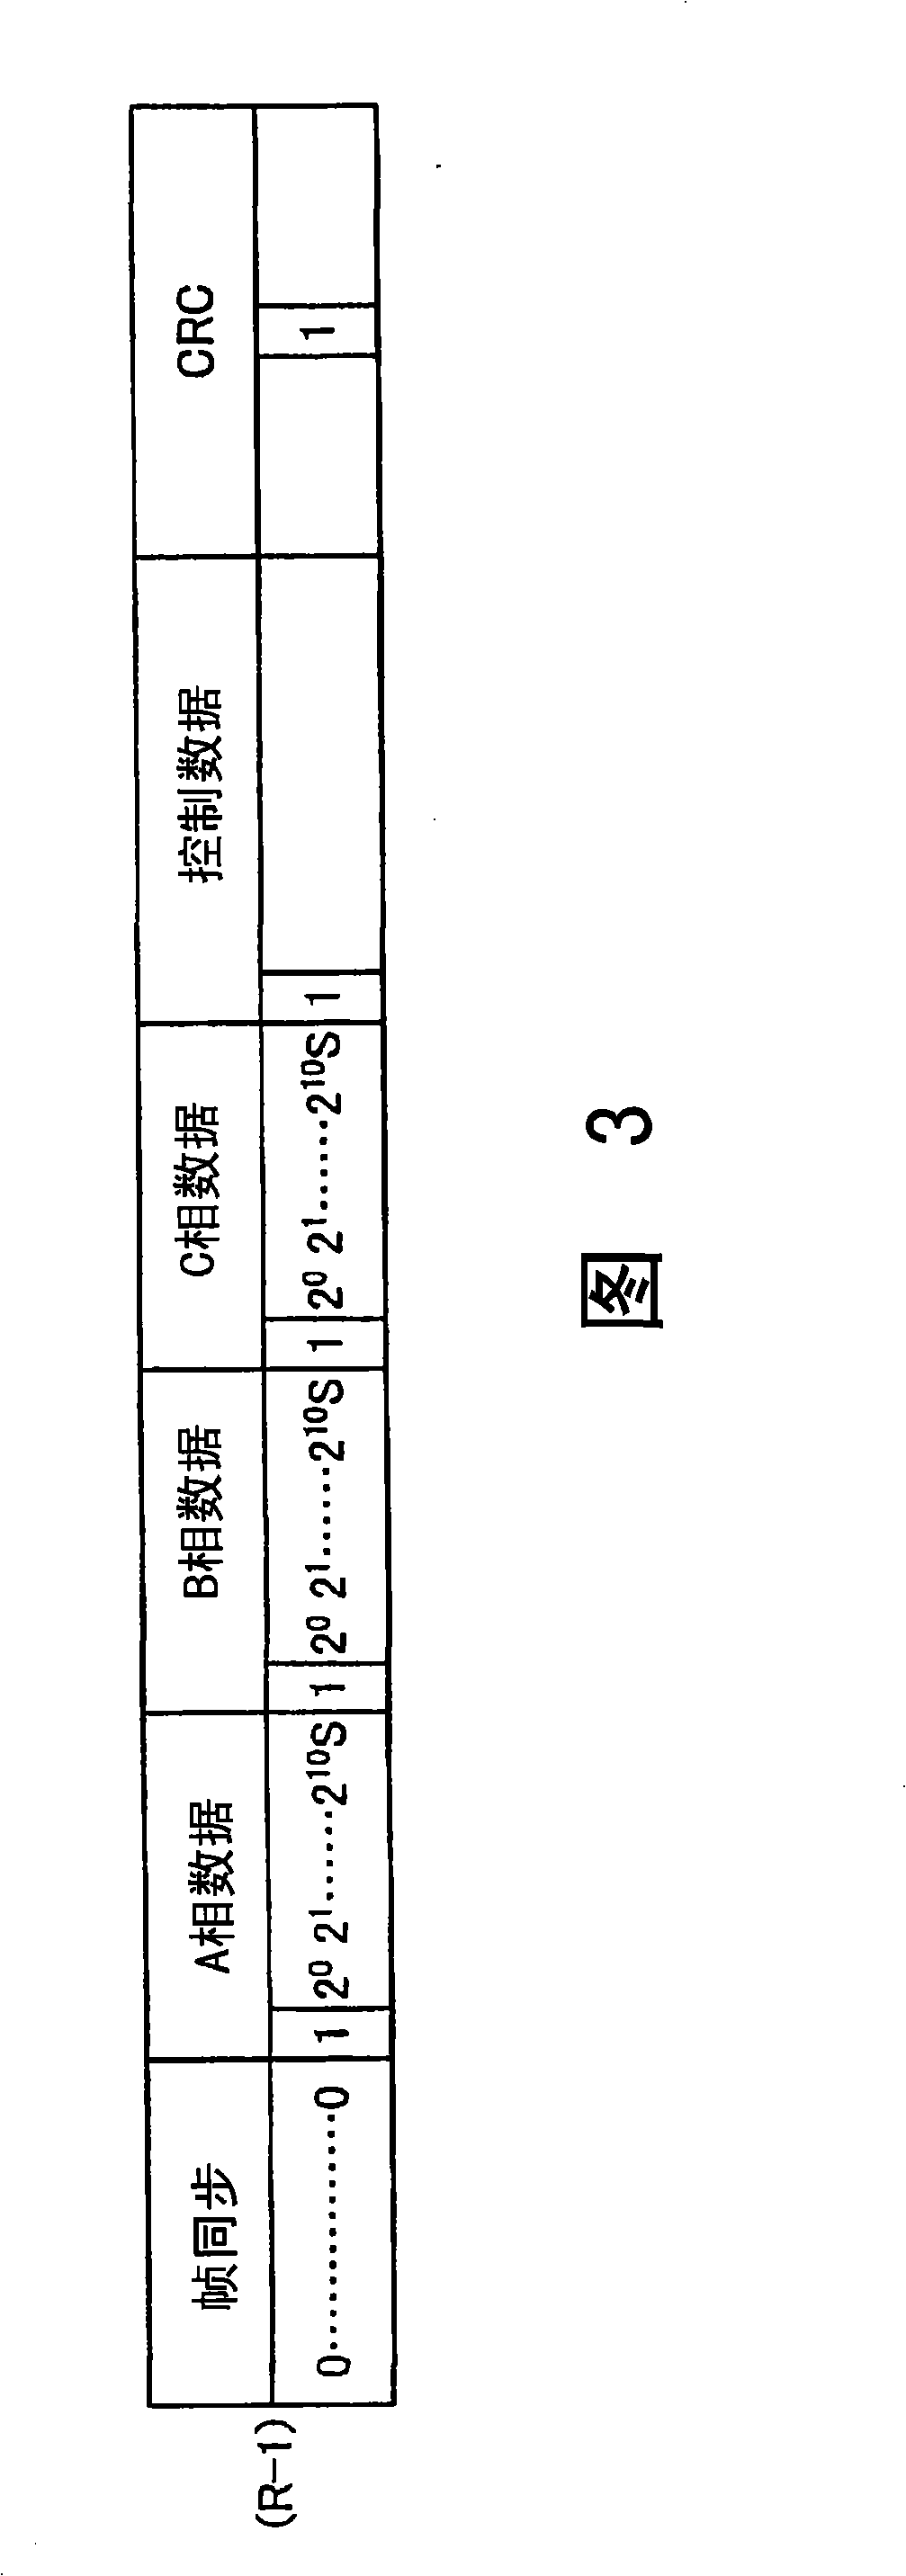 Current-differential relay device